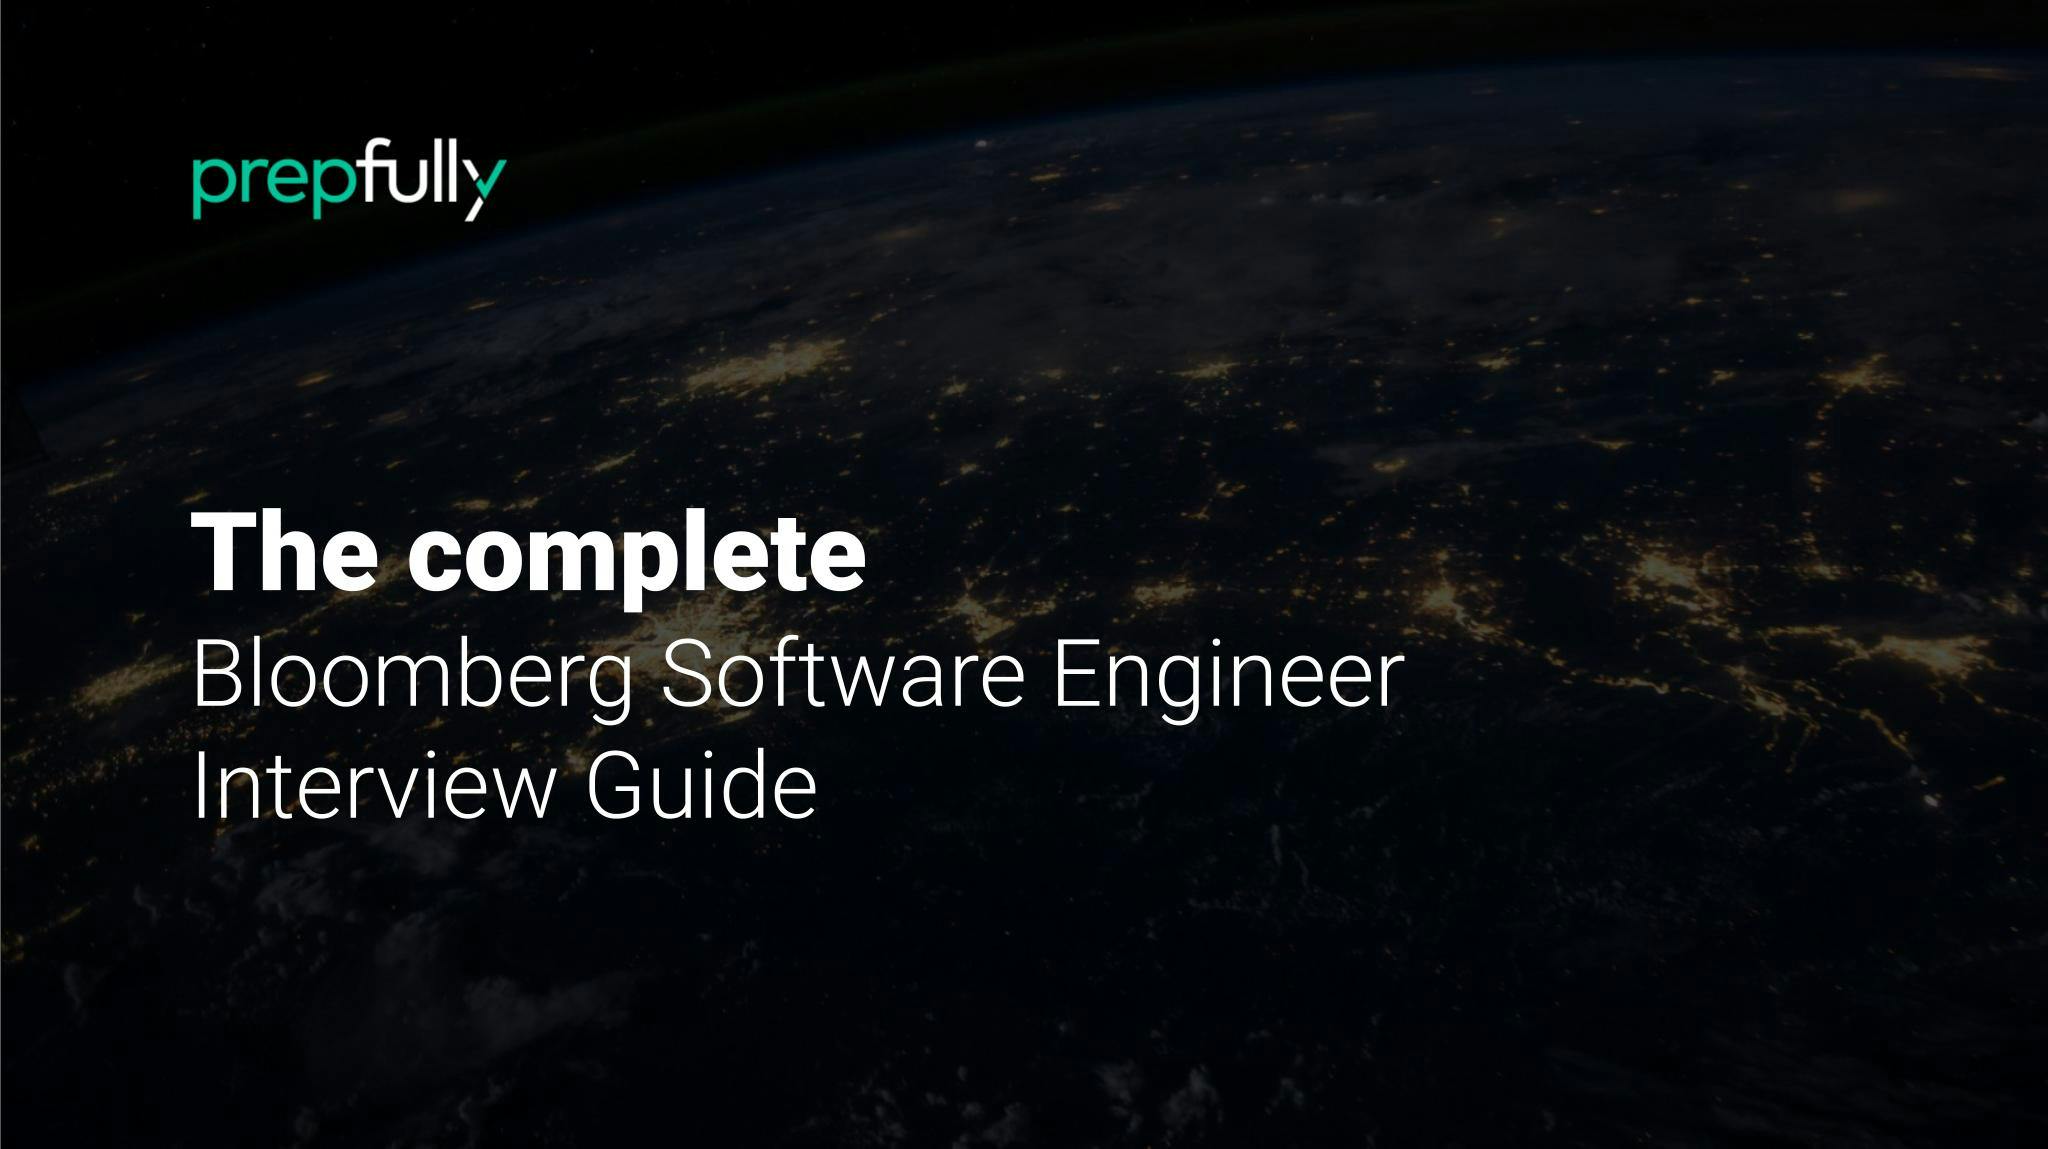 Interview guide for Bloomberg Software Engineer